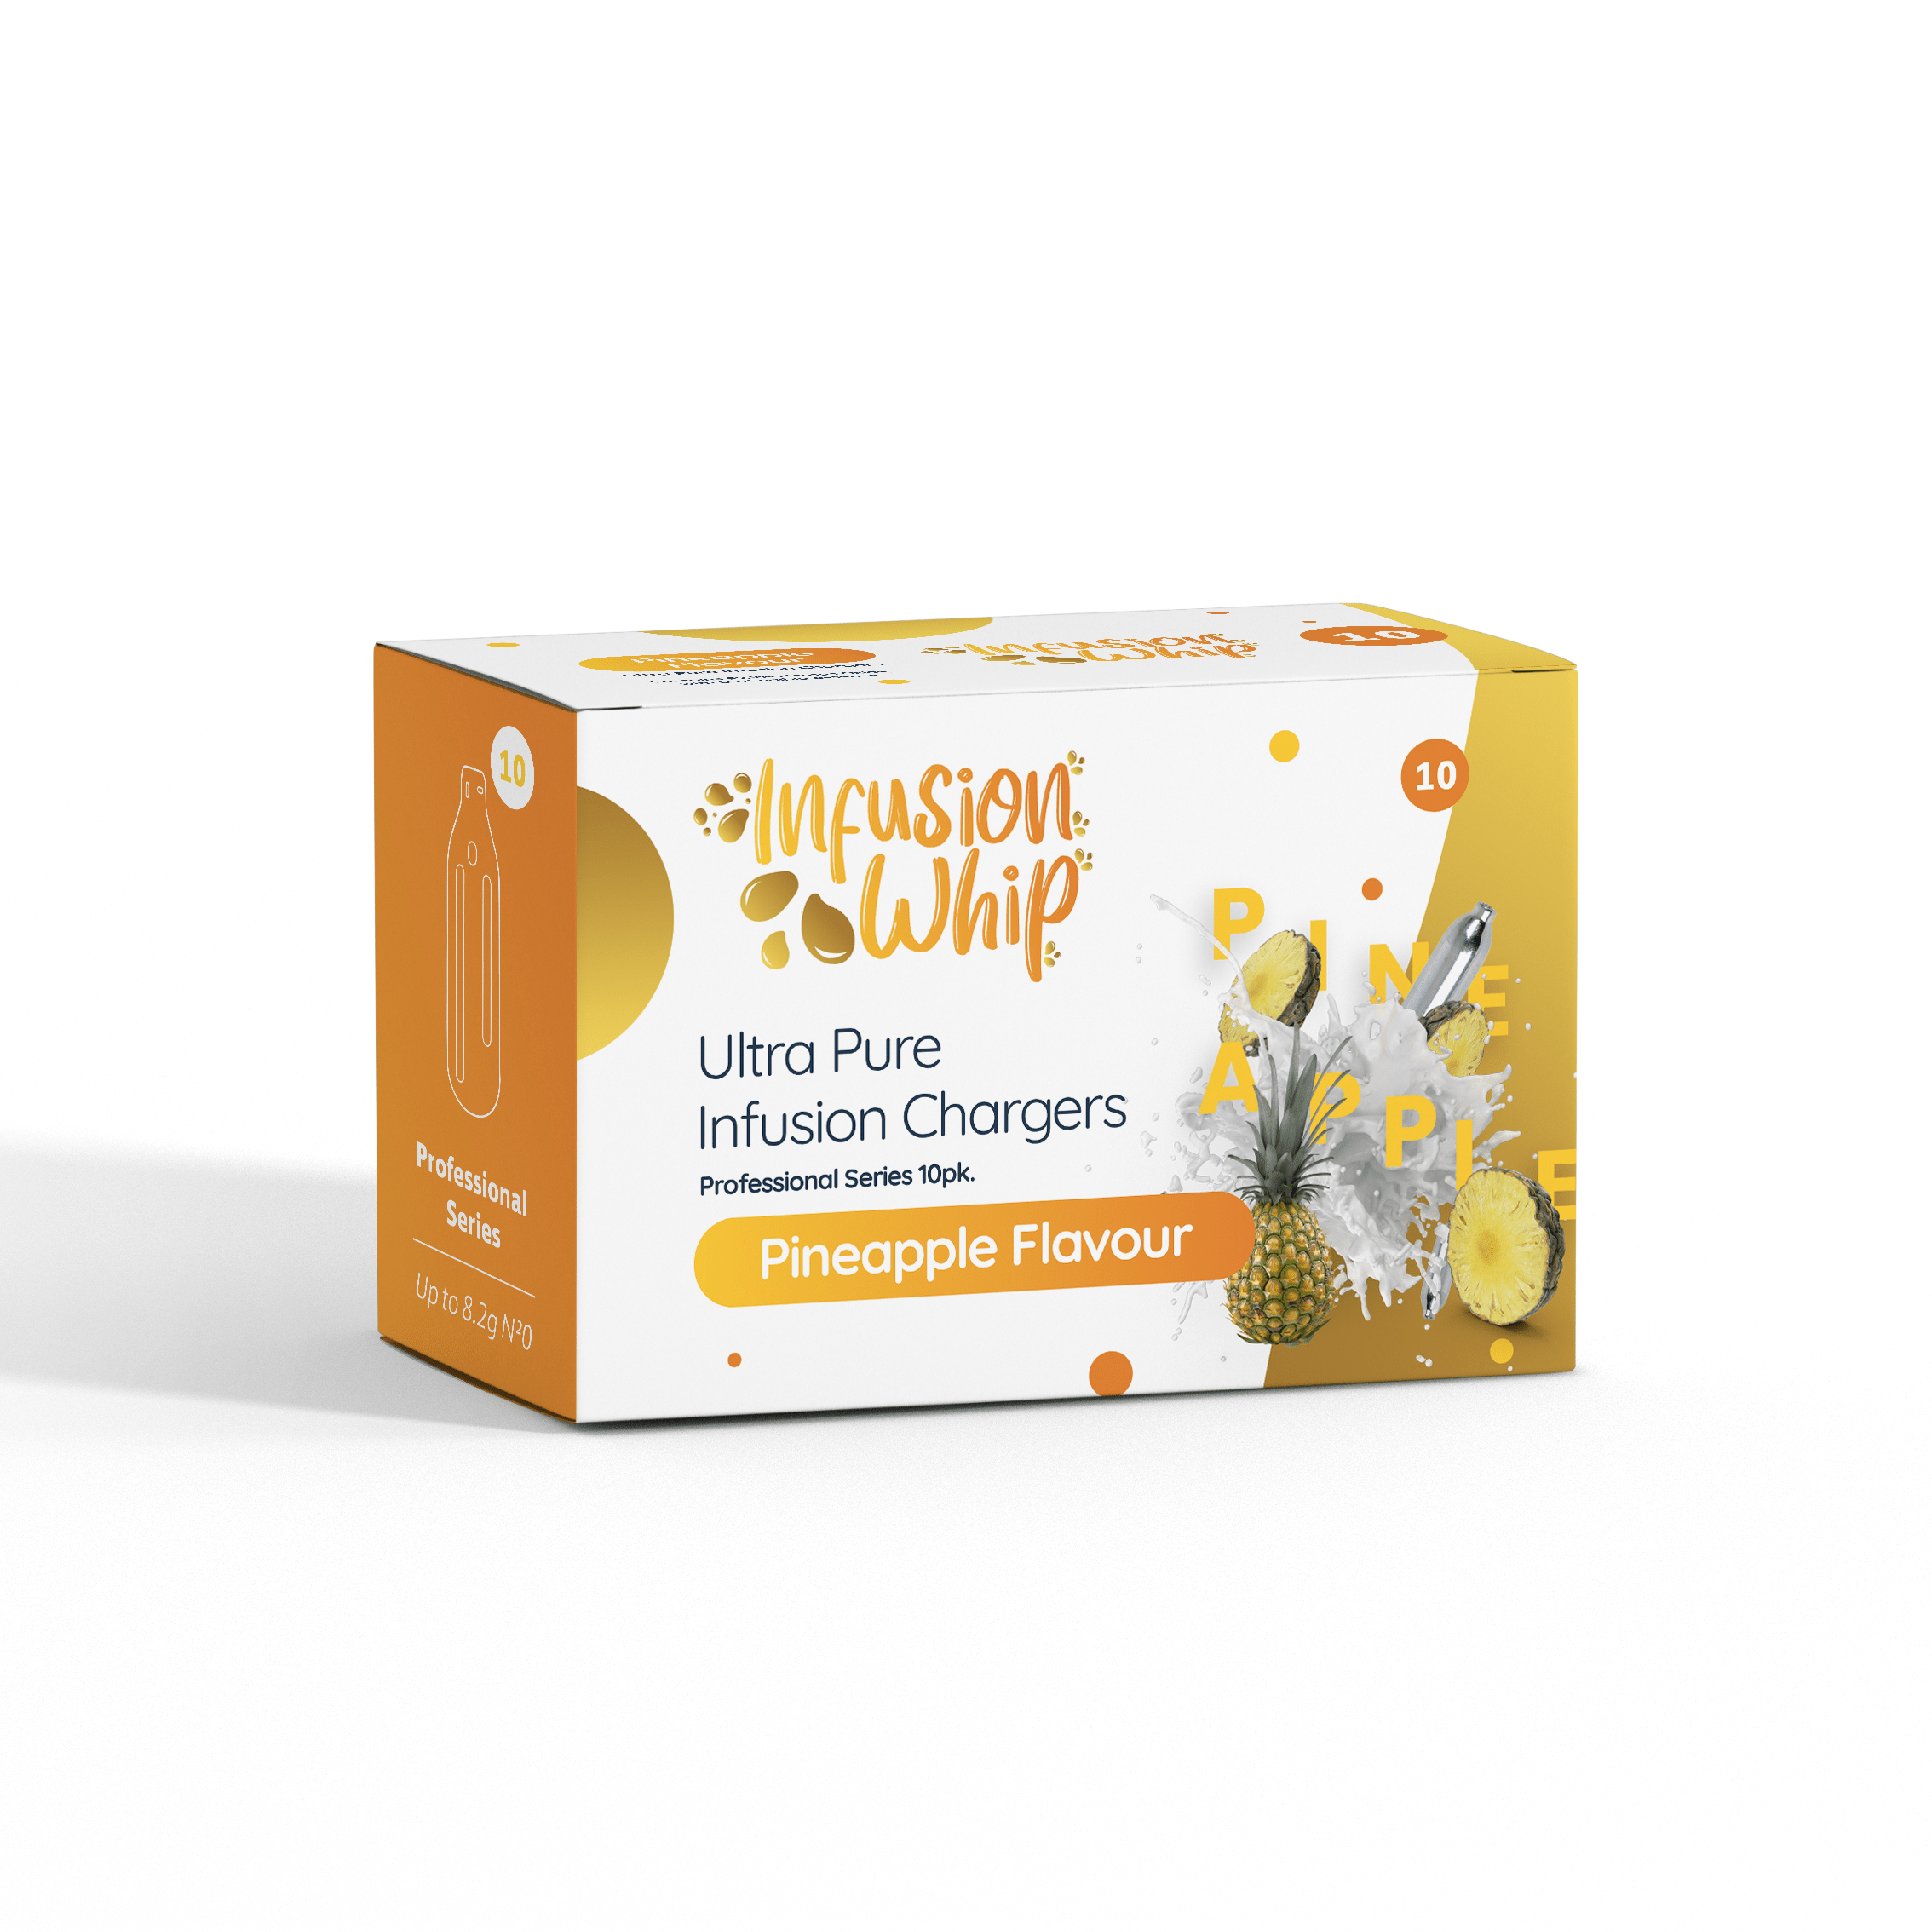 New Infusionwhip Pineapple Infusion Chargers 8.2g - 10pks